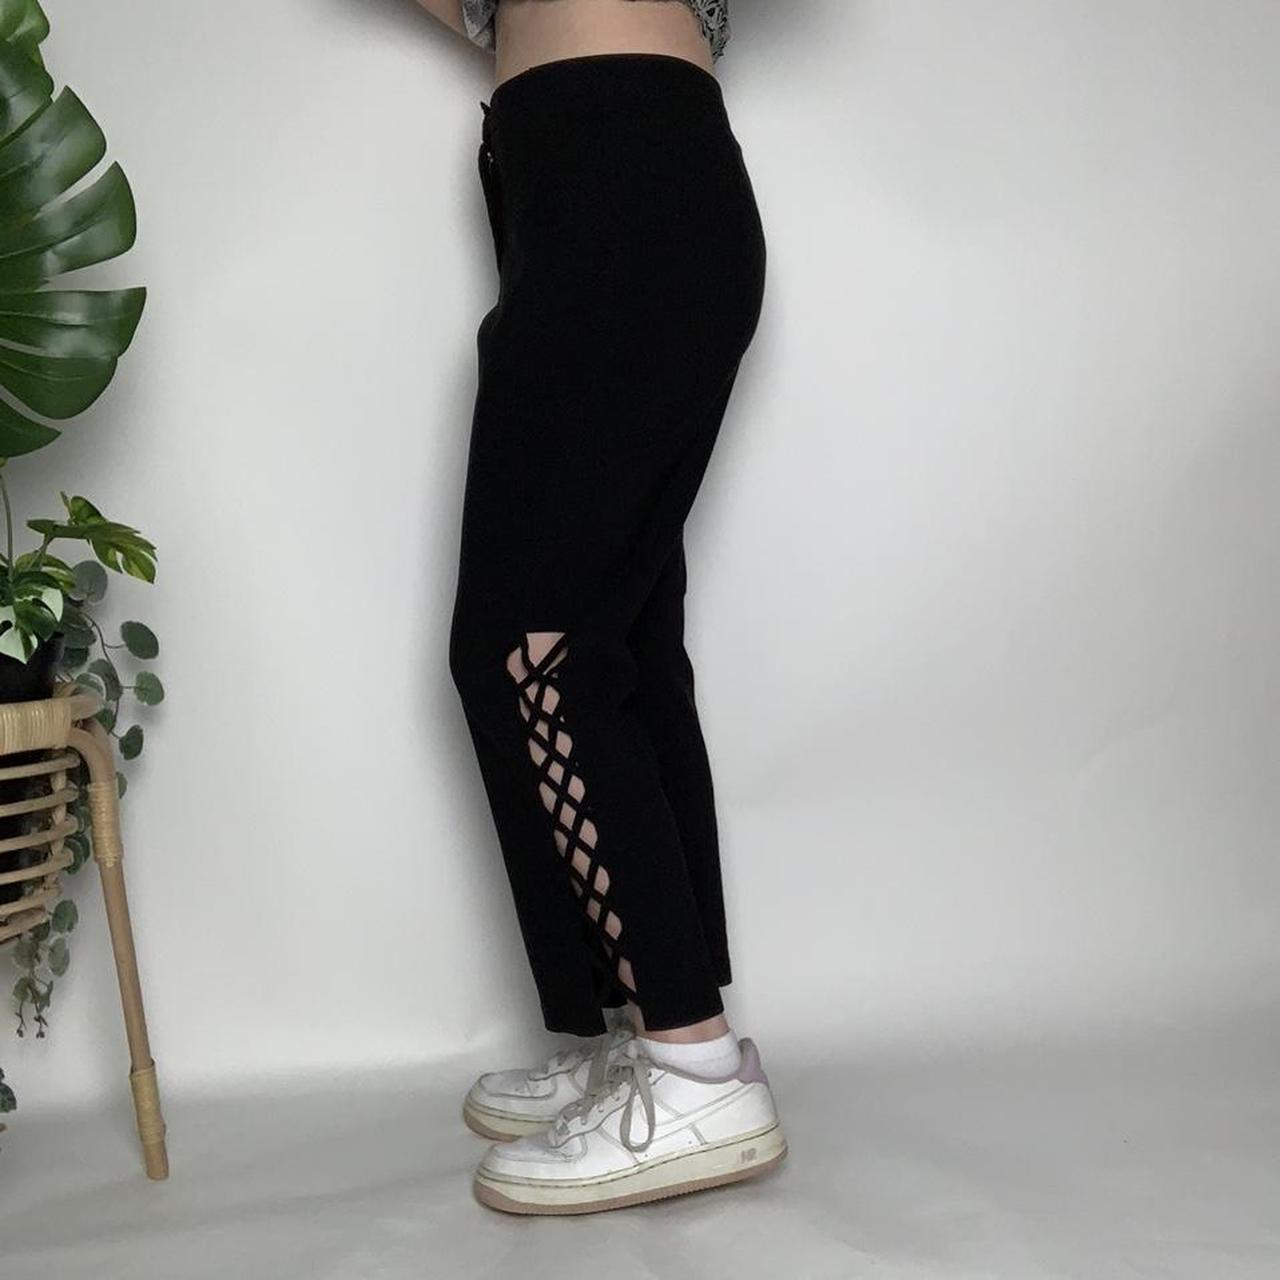 Vintage 90s black flared trousers with crisscross cut-out detailing